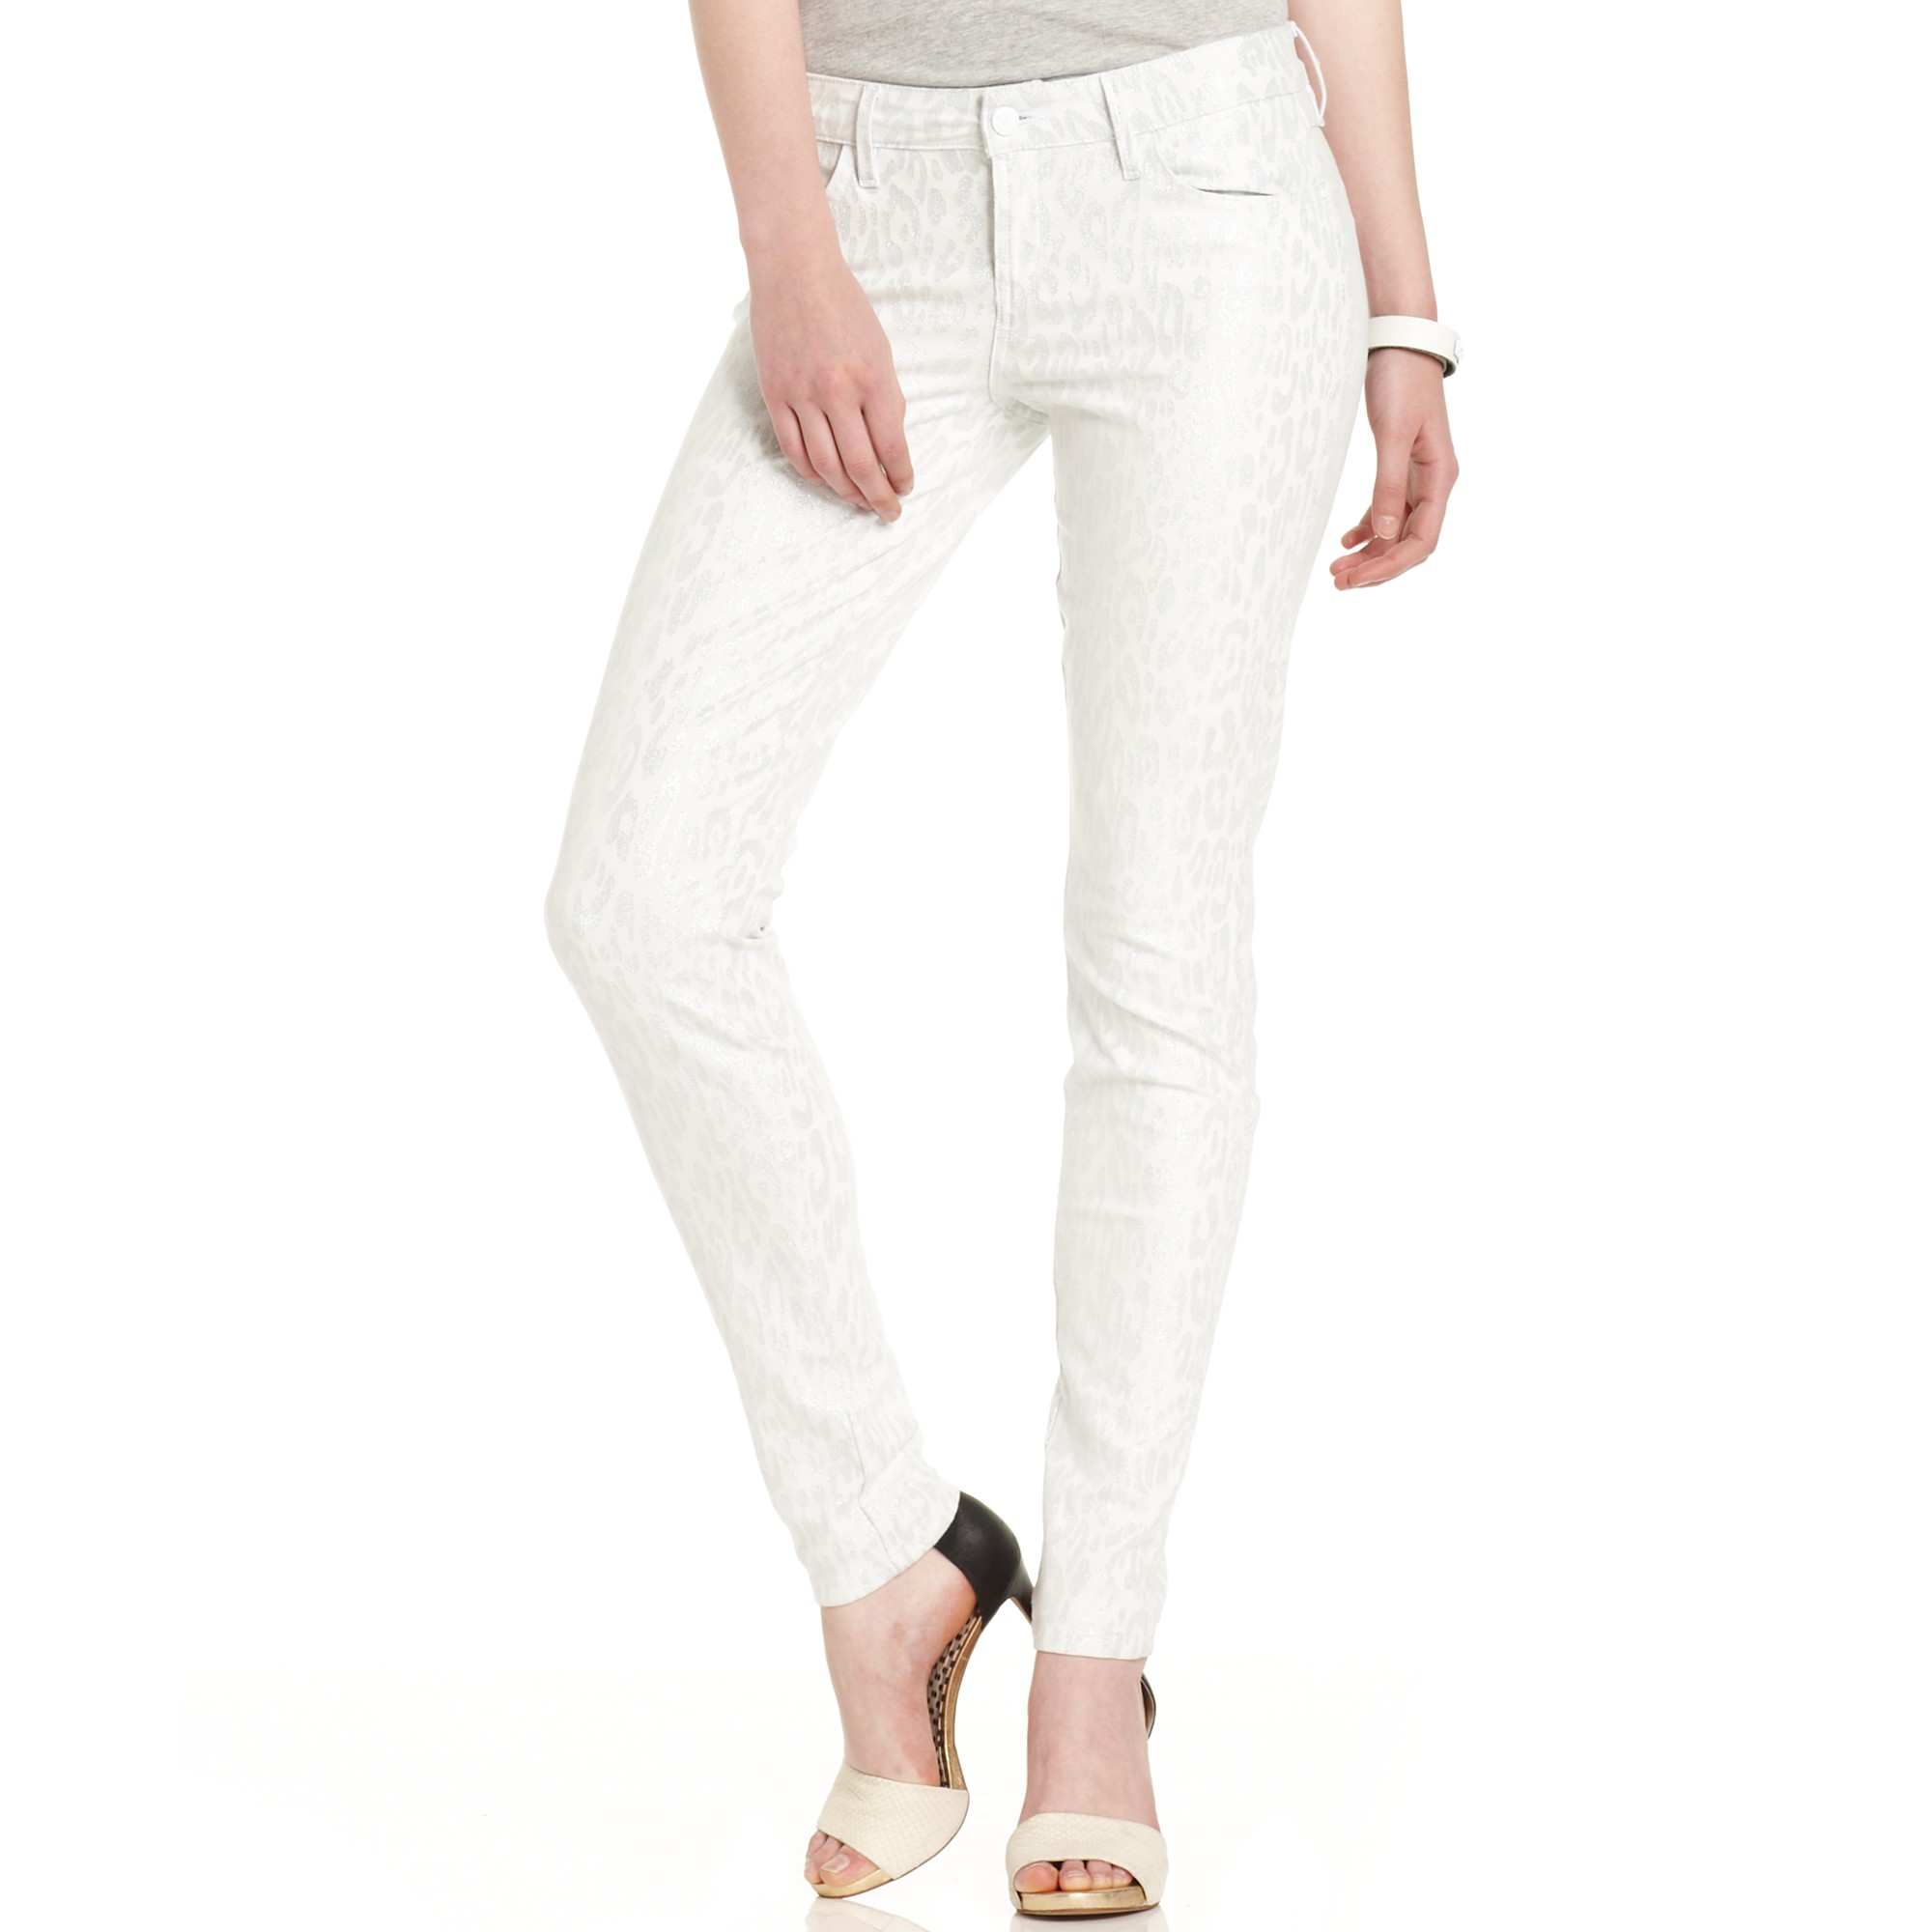 Guess Jeans Brittney Skinny in White - Lyst